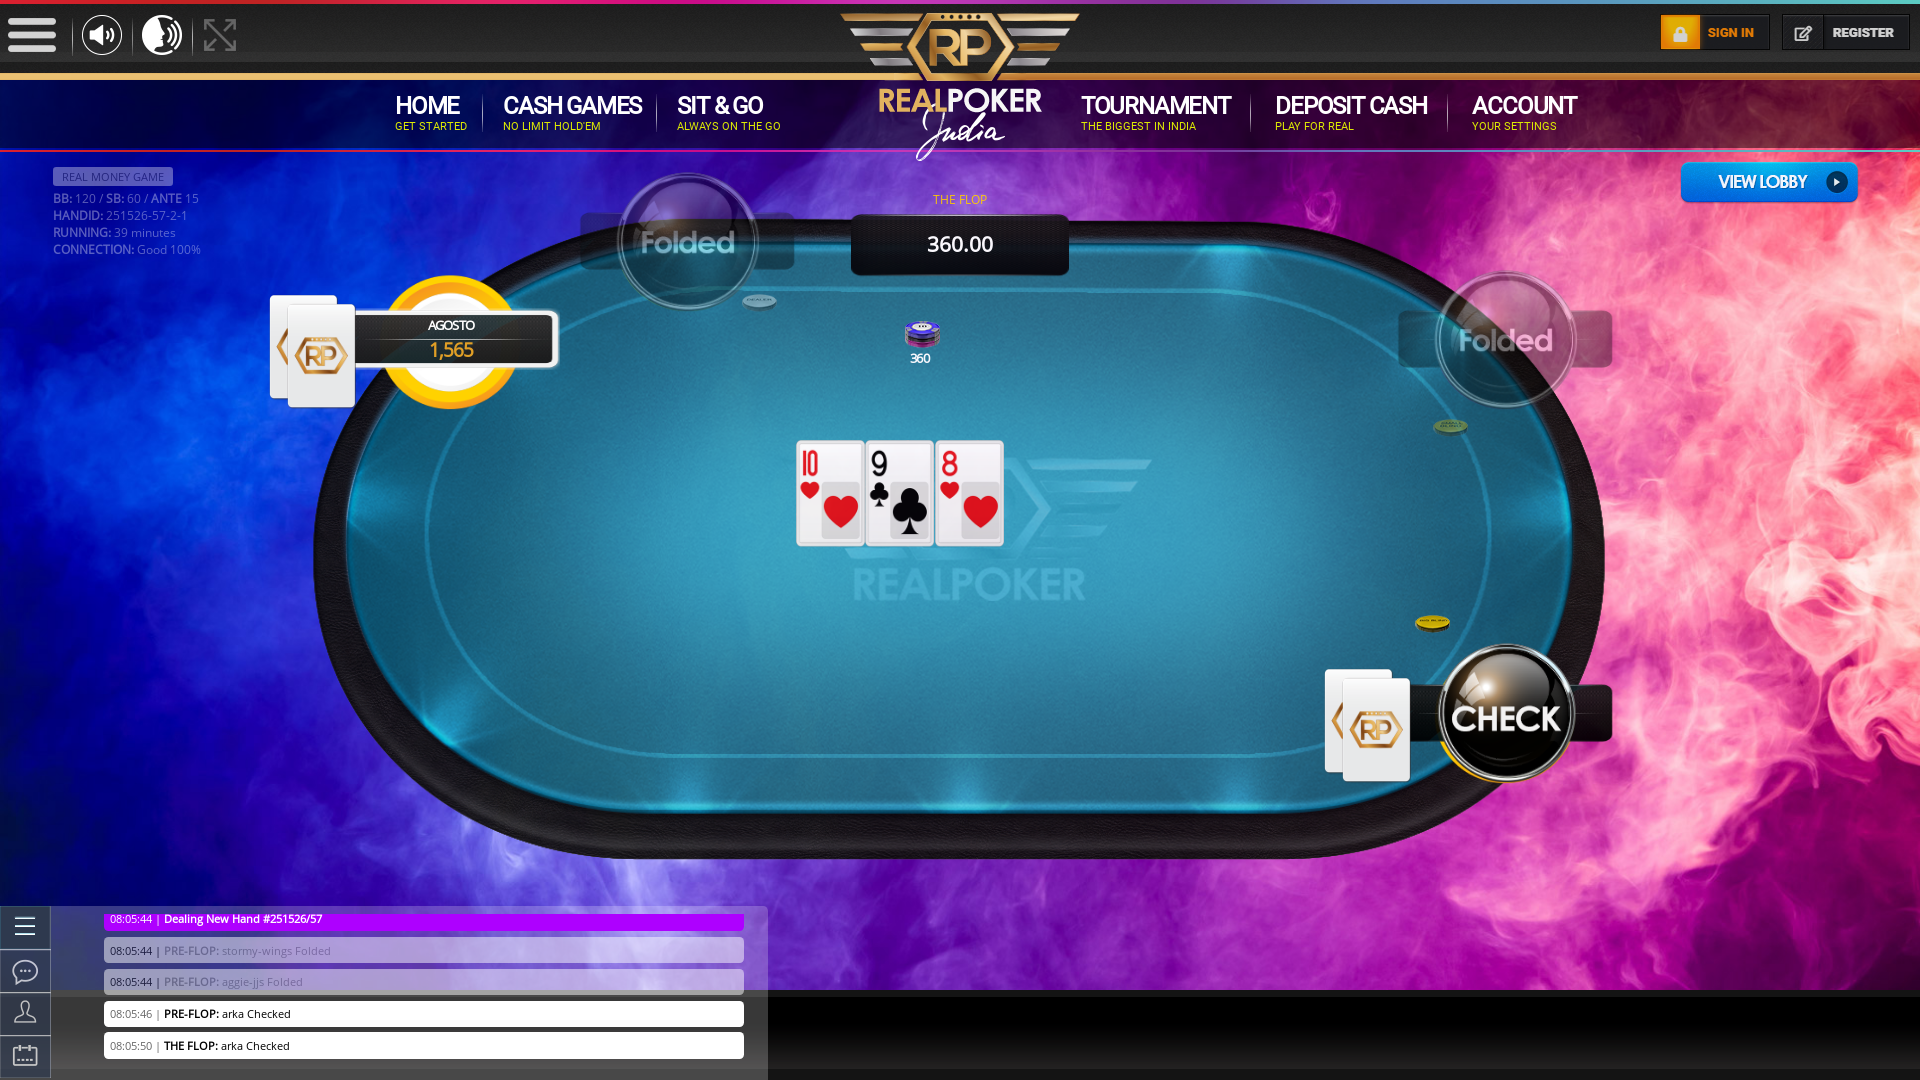 Indian 10 player poker in the 39th minute